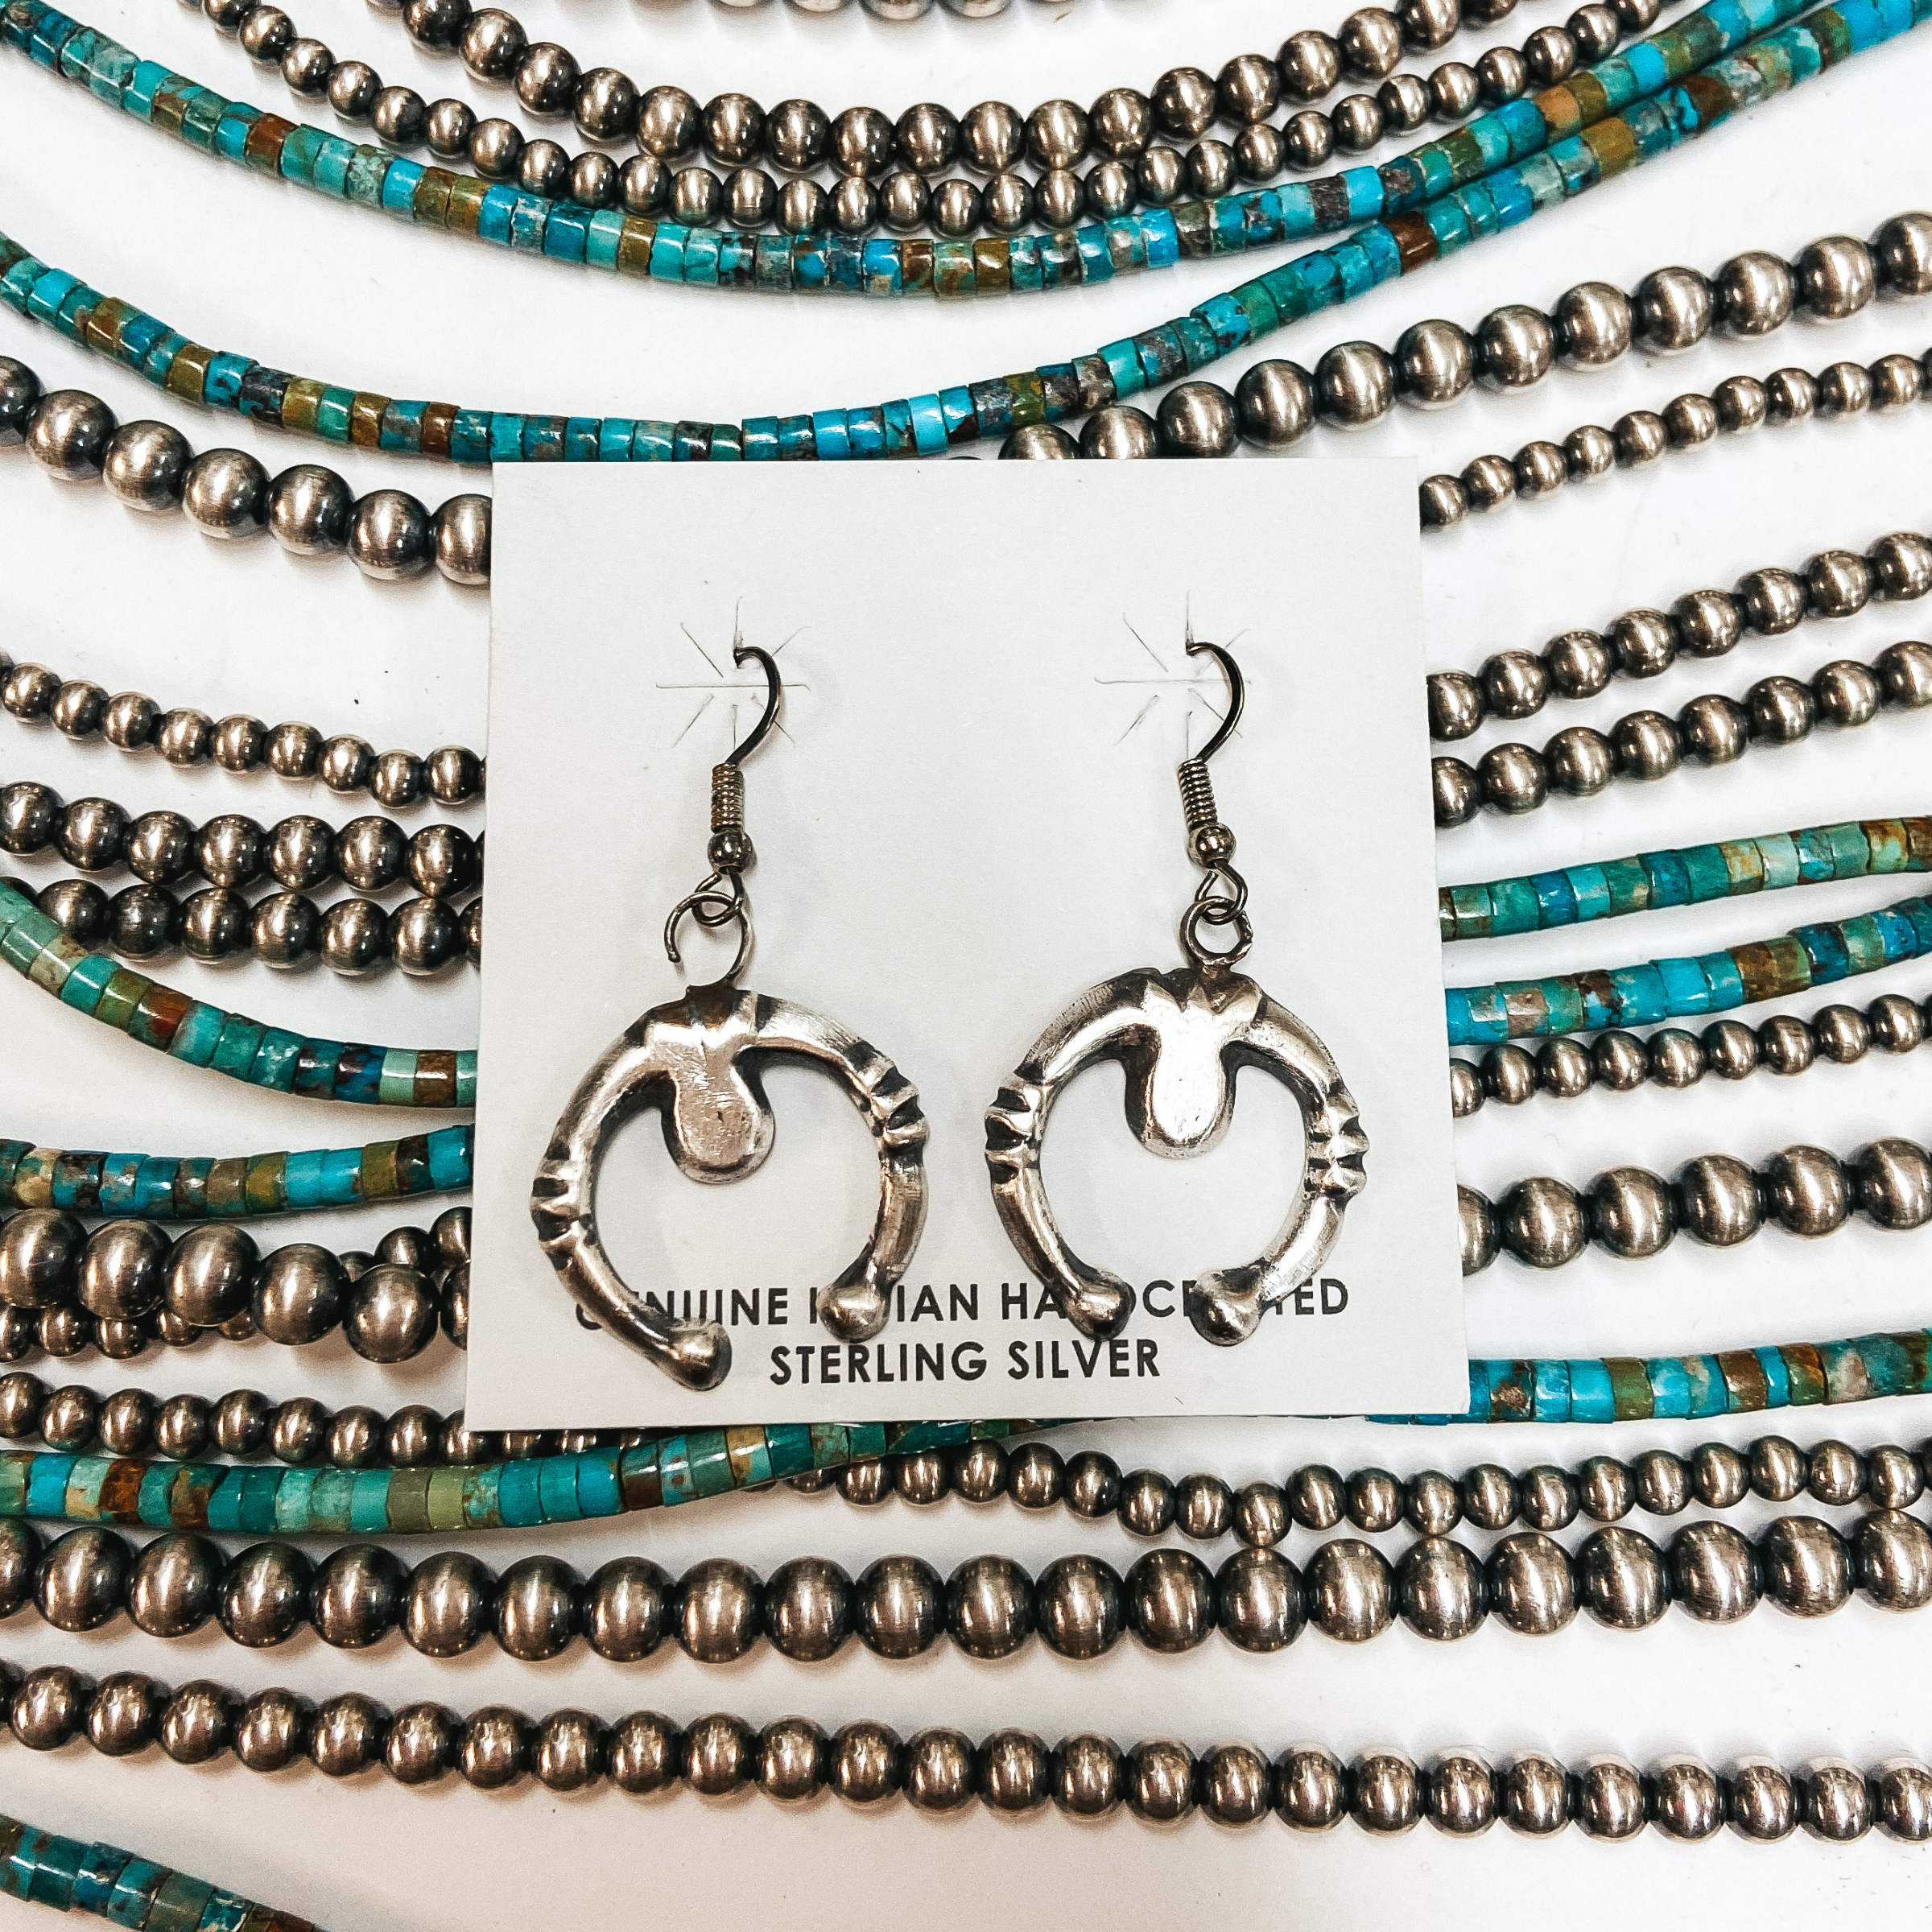 A pair of sterling silver naja shape earrings on a card displaying "Genuine Indian Handcrafted Sterling Silver." Pictured on white background with Navajo Pearls and turquoise beads.